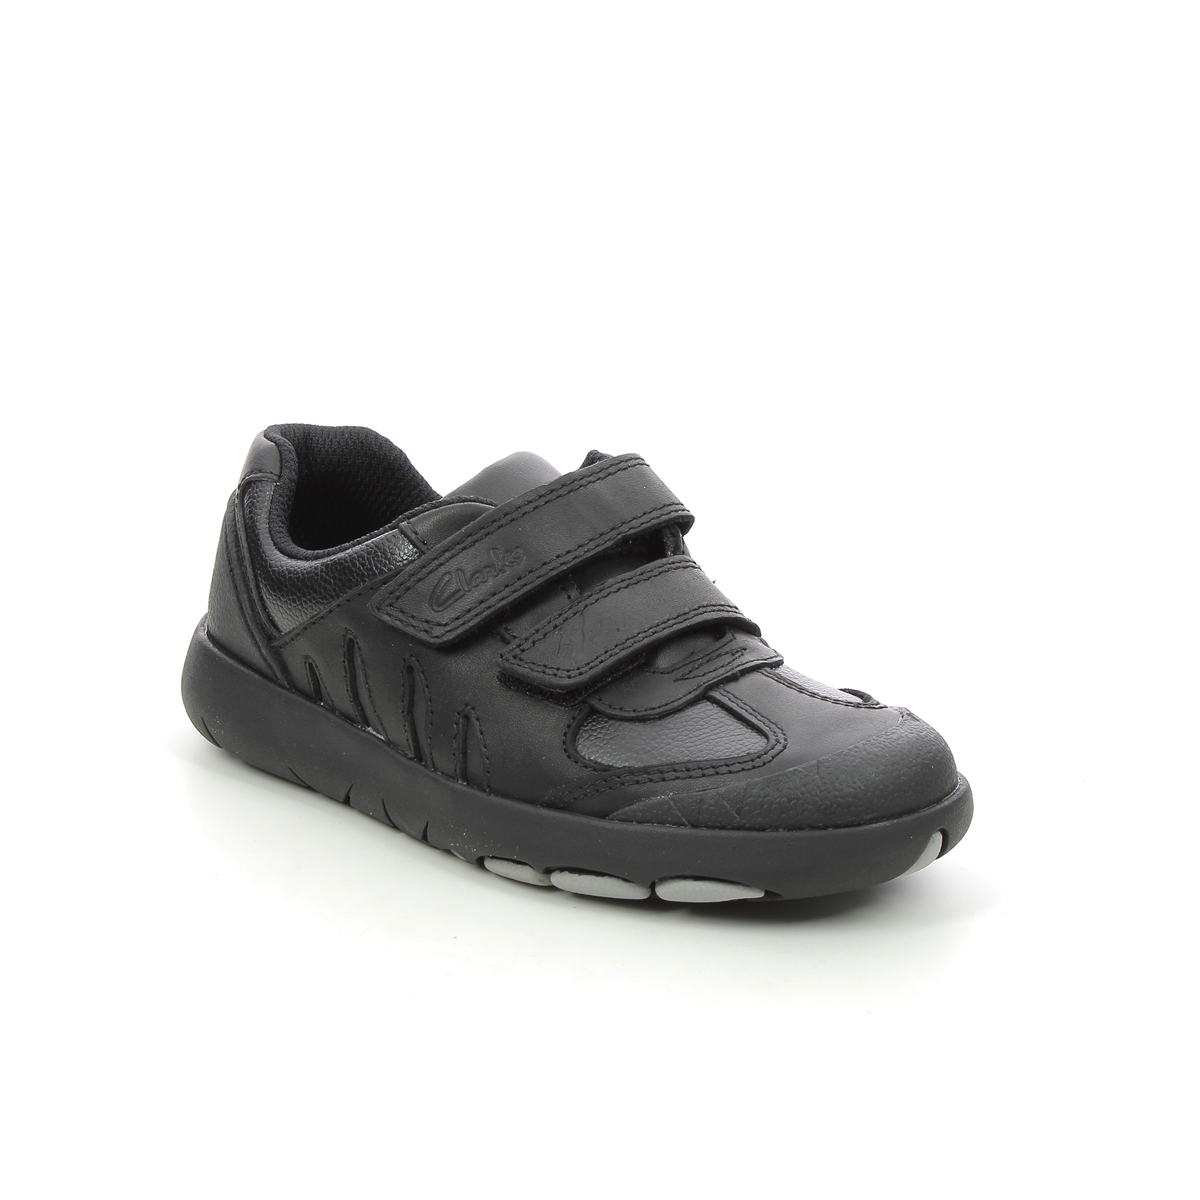 Clarks Rex Stride K Black leather Kids Boys Shoes 6269-86F in a Plain Leather in Size 10.5